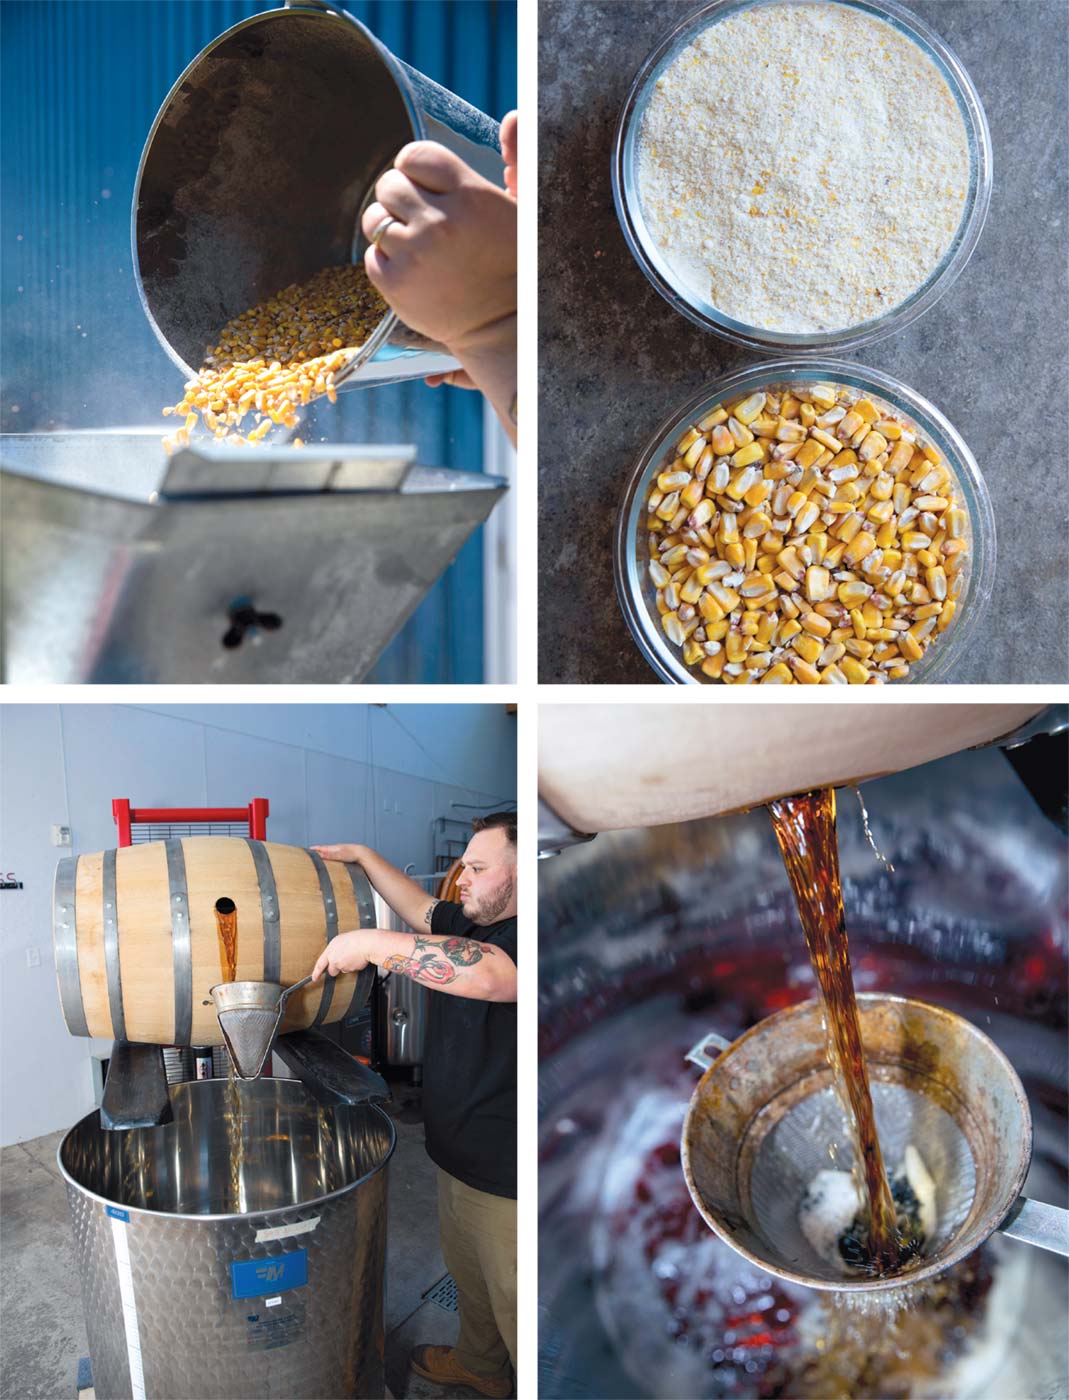 steps in the distilling process